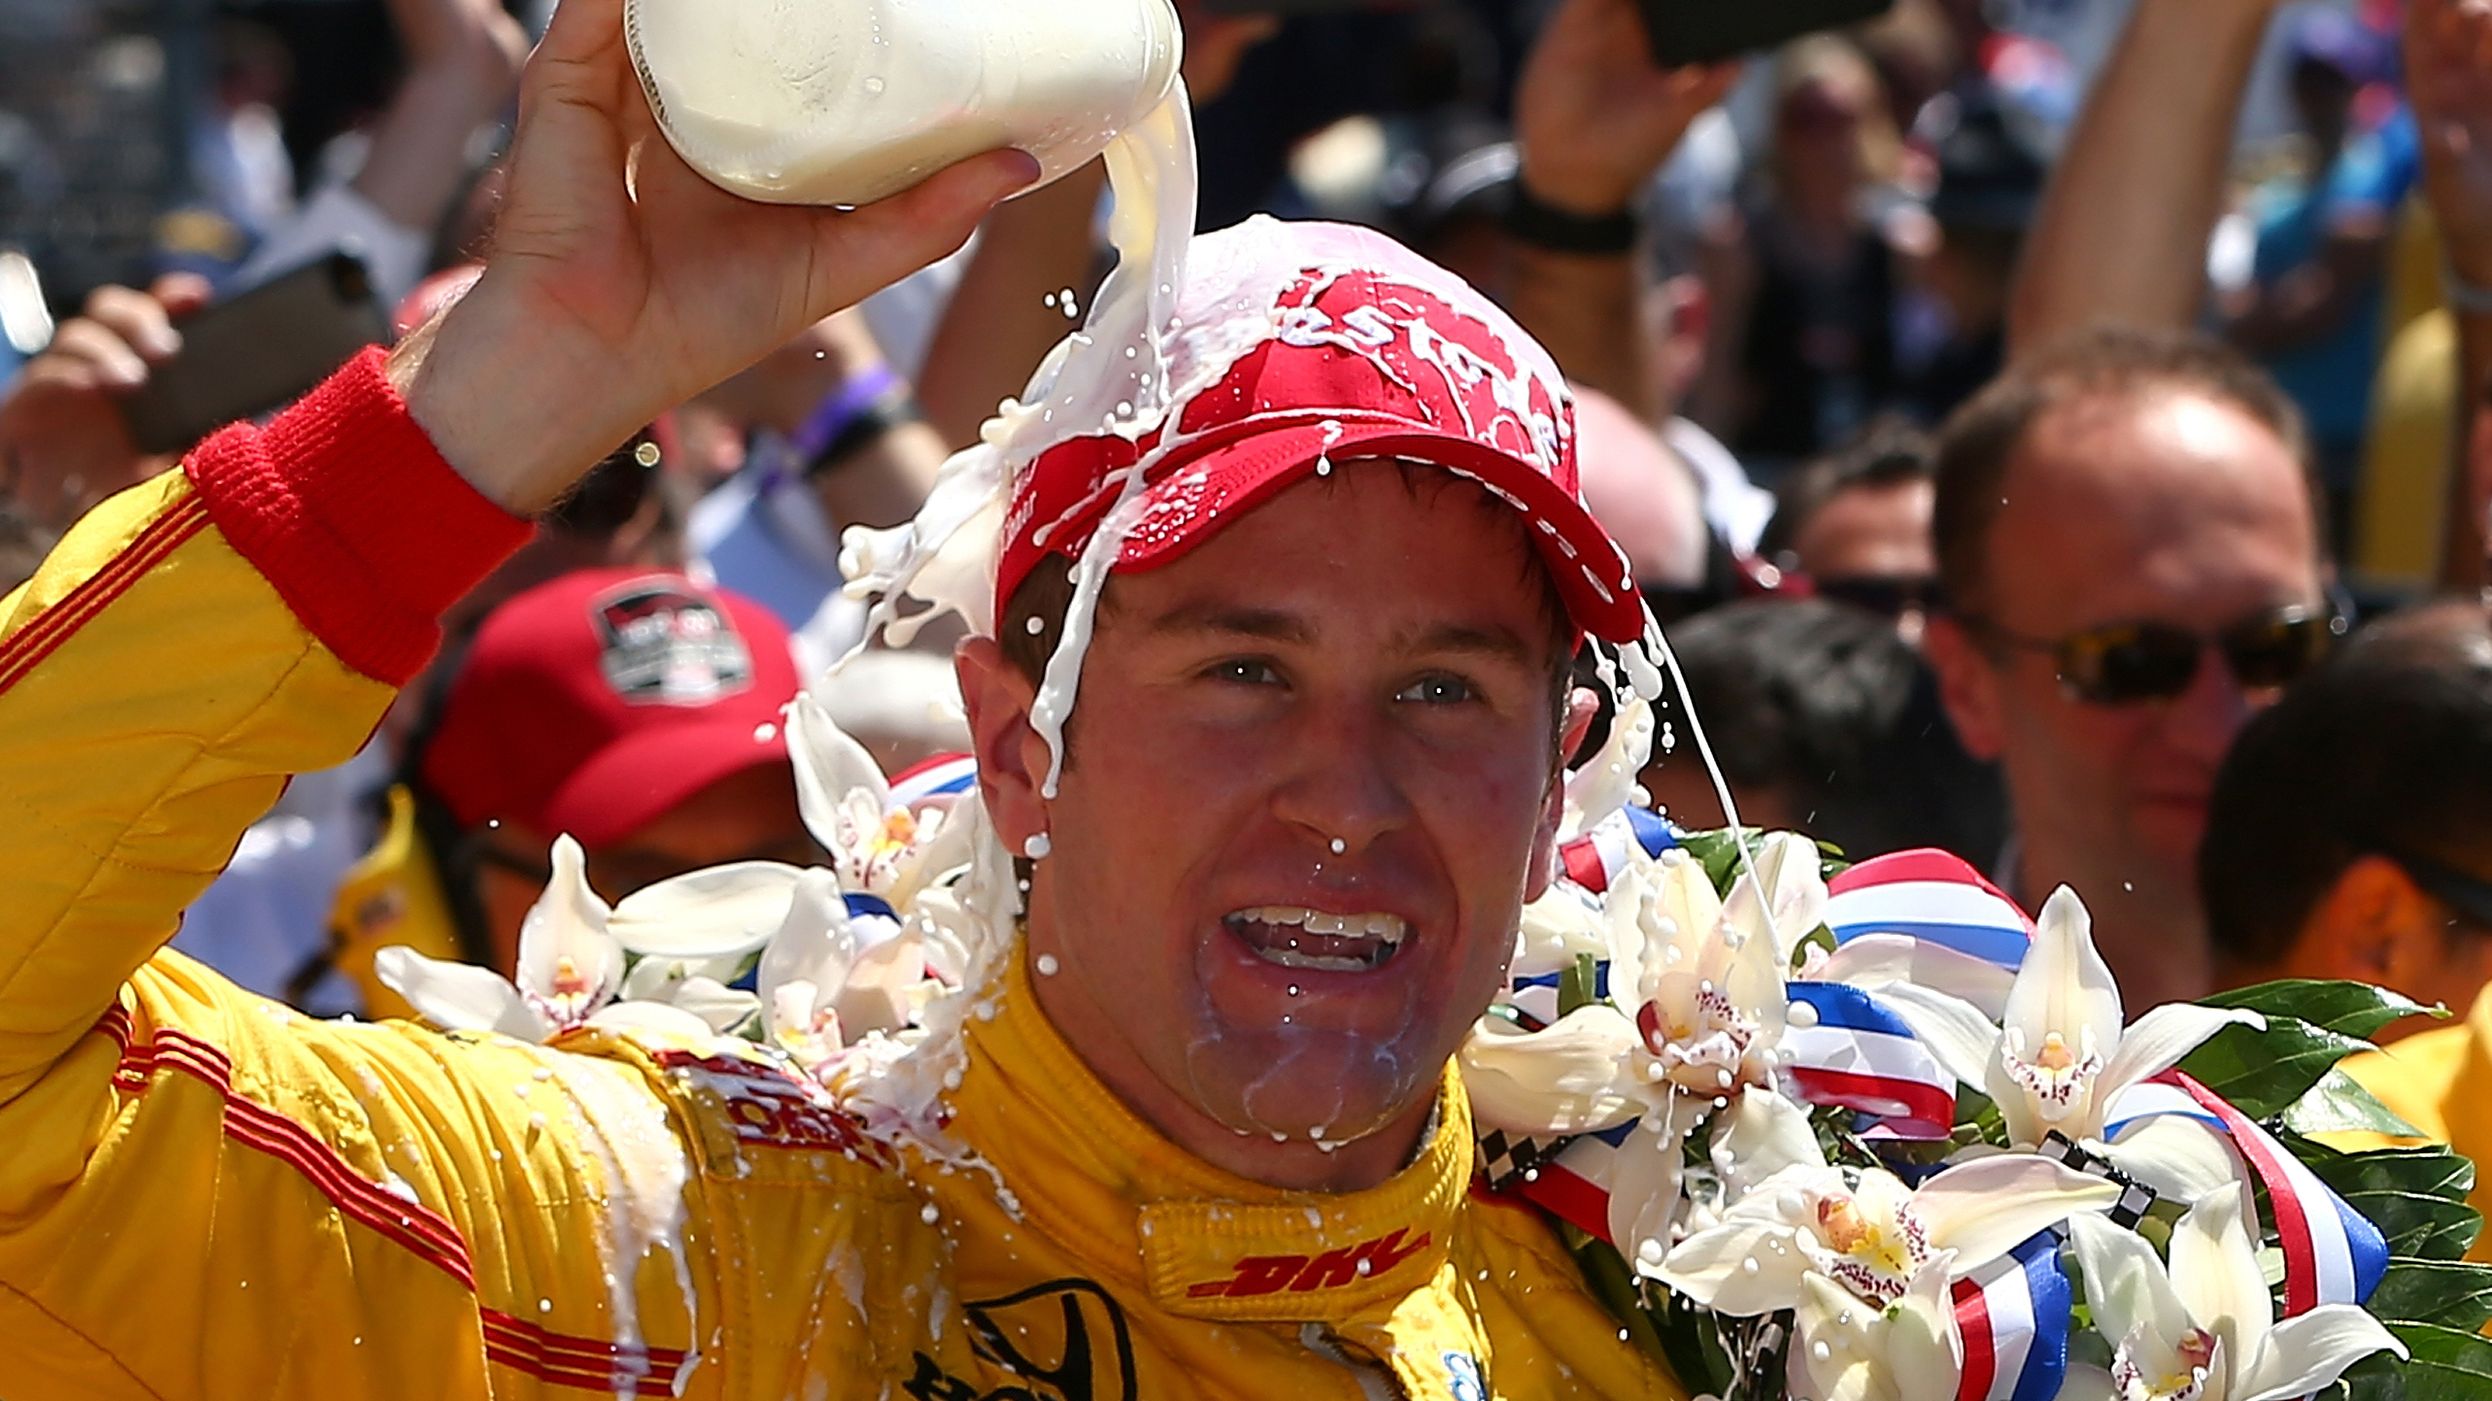 Ryan Hunter-Reay won the 98th running of the Indianapolis 500 in 2014.